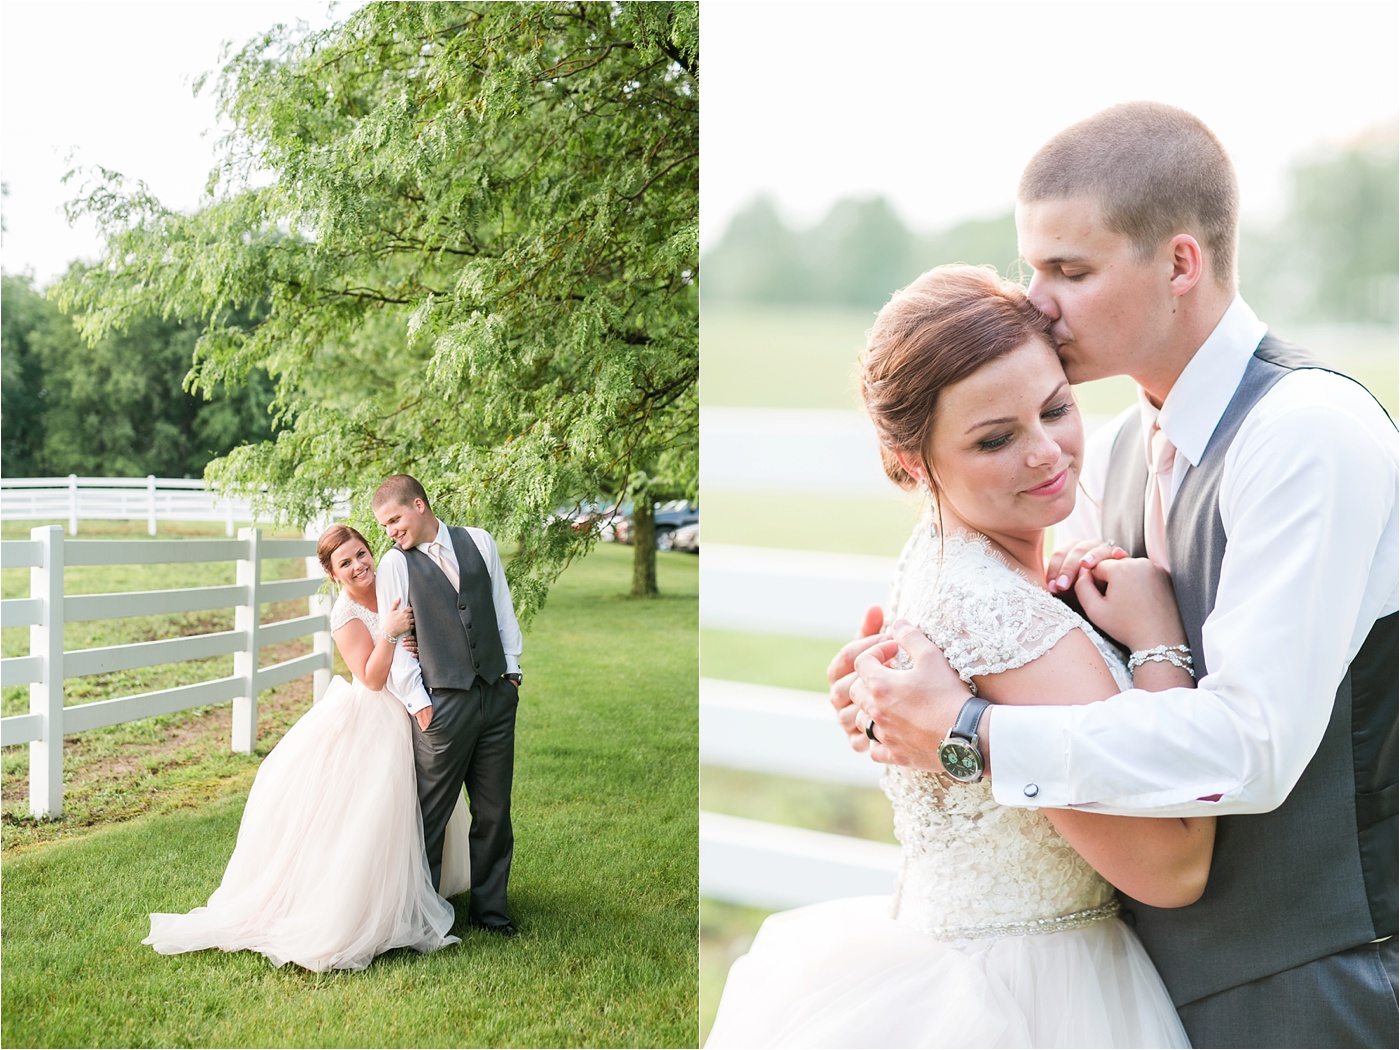 A Blush Outdoor wedding at Irongate Equestrian | KariMe Photography_0176